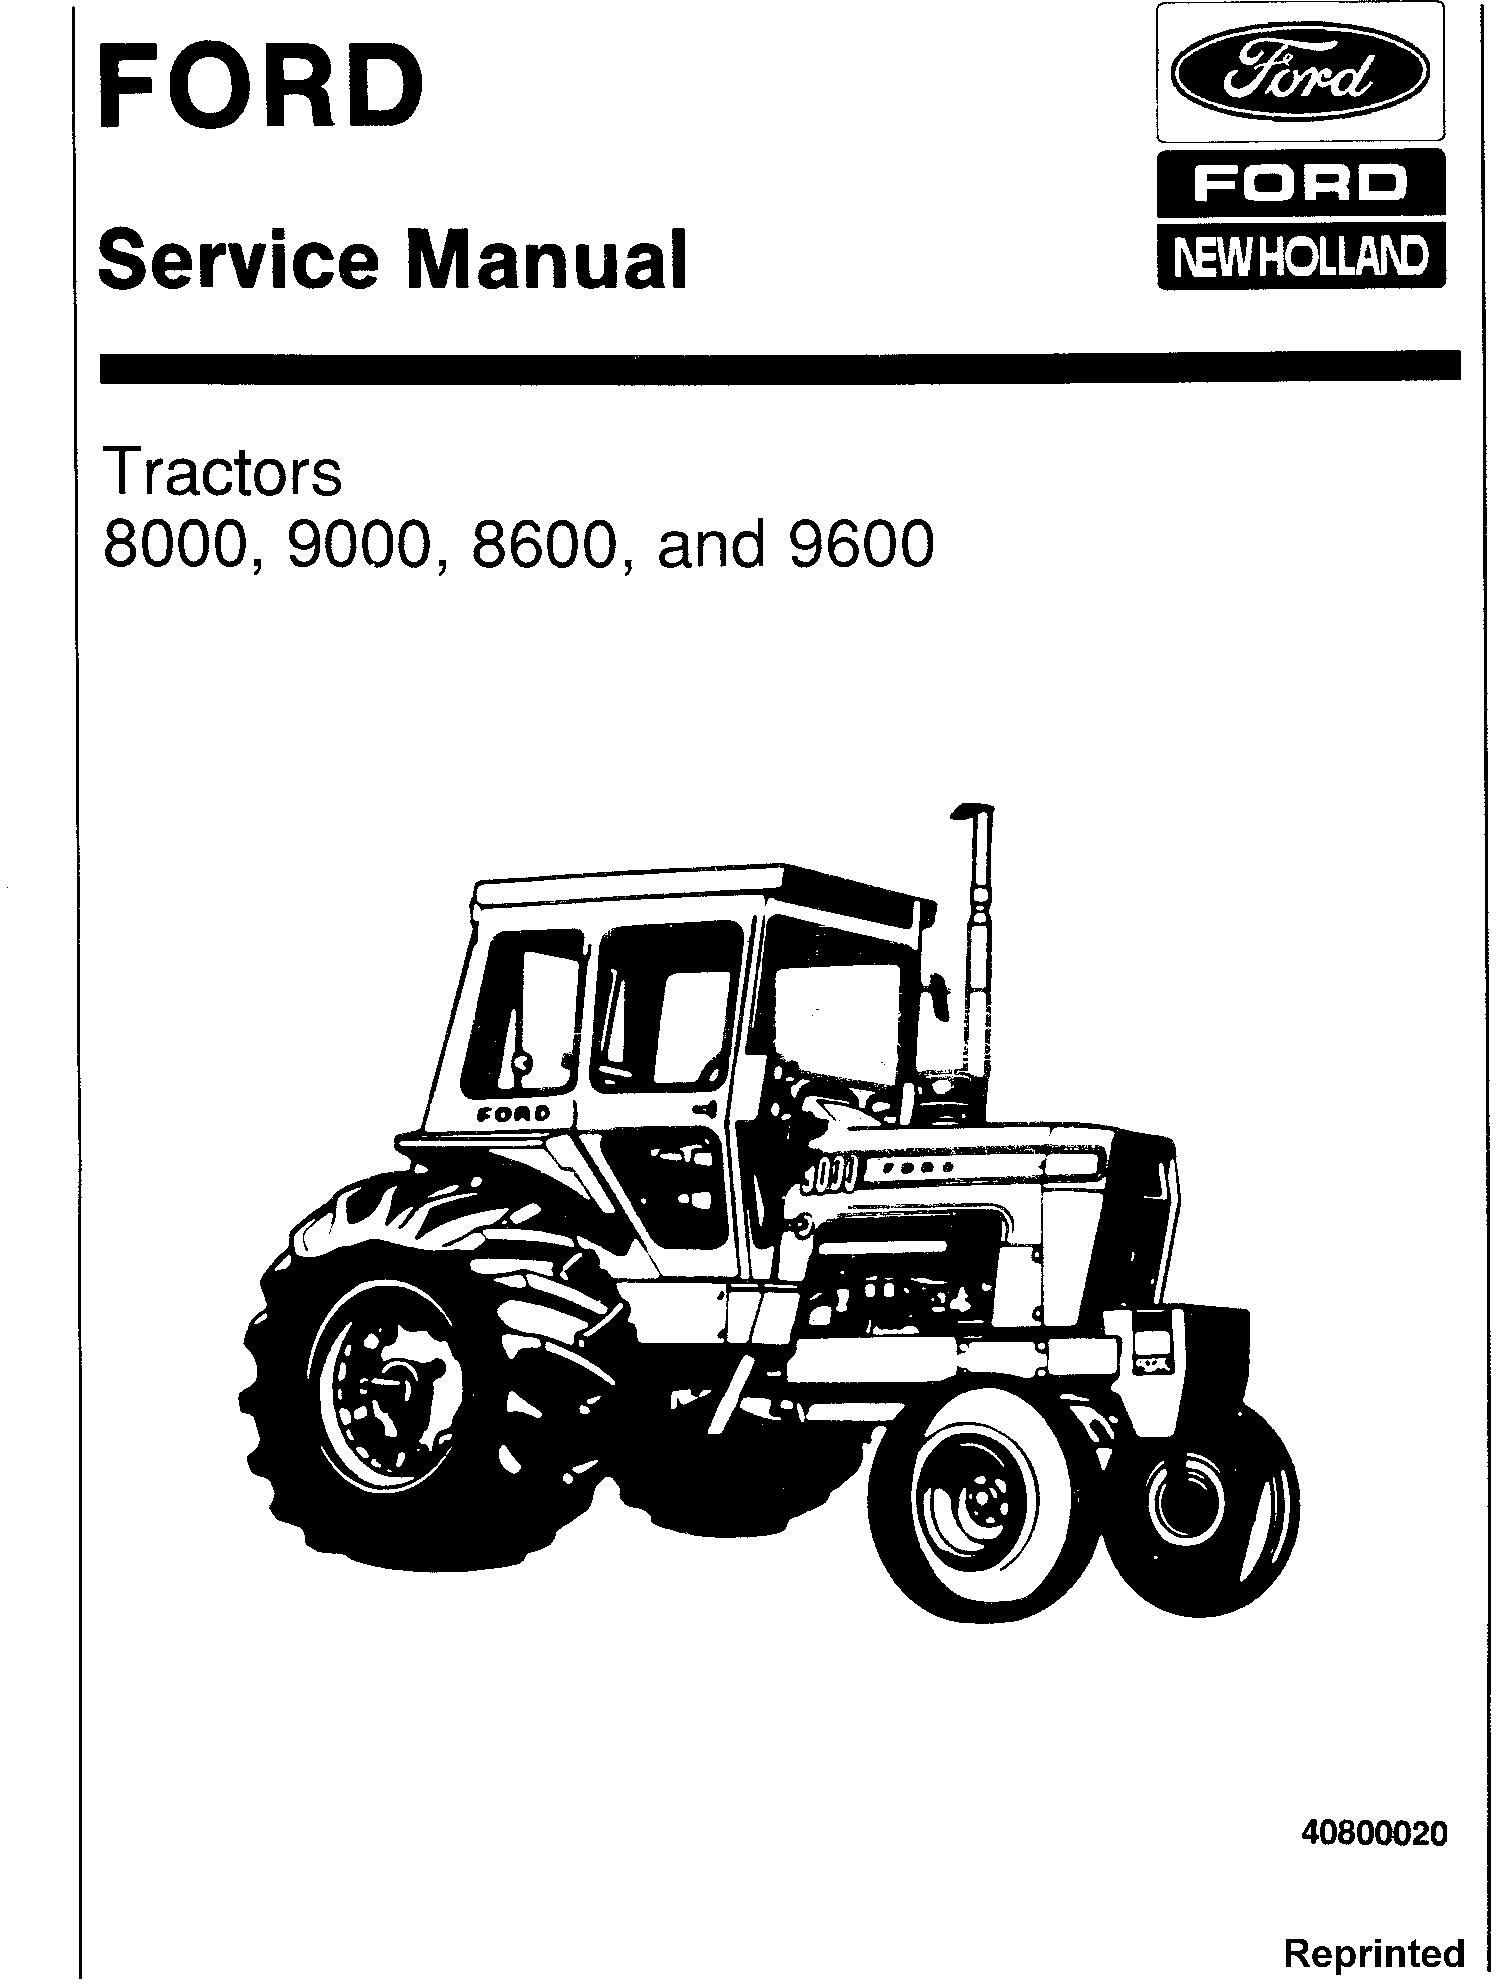 Ford 8000, 9000, 8600, 9600 Tractor Service Repair Manual (SE3095) / Deere  Technical Manuals  Ford 8000 Tractor Wiring Diagram    John Deere Technical Manuals Store